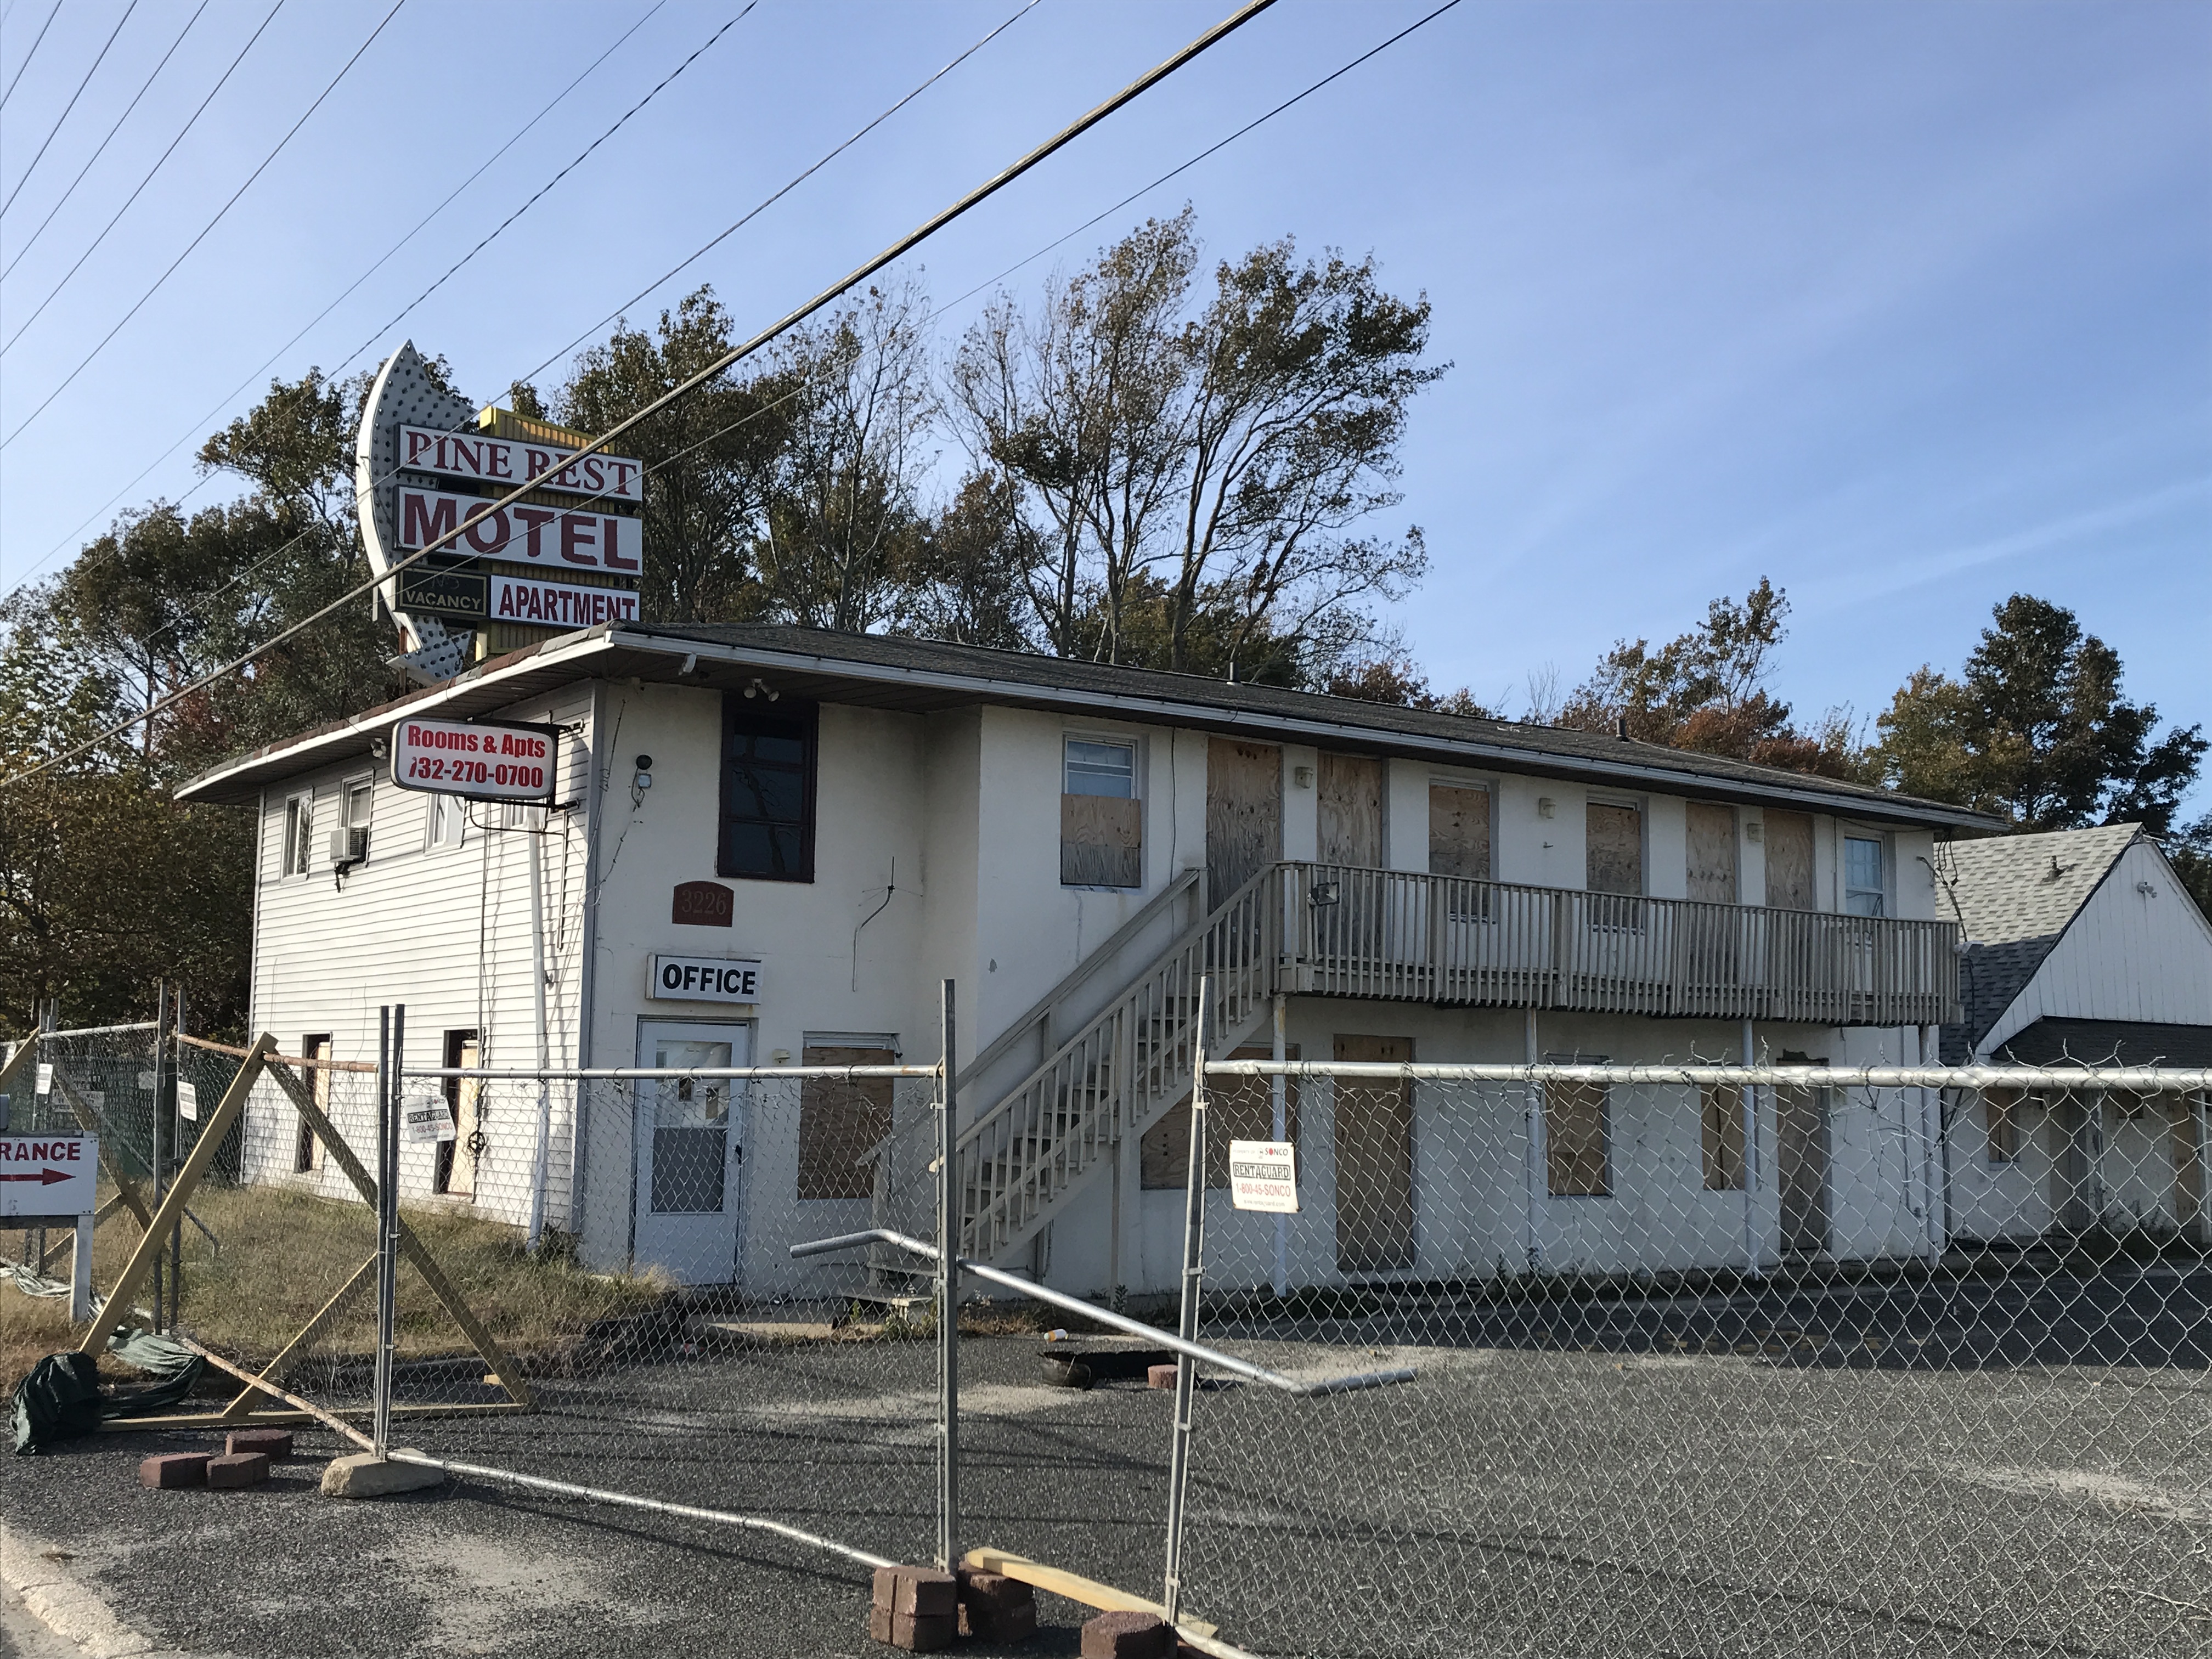 The Pine Rest Motel along Route 37 in Toms River, N.J., Oct. 2018. (Photo: Daniel Nee)